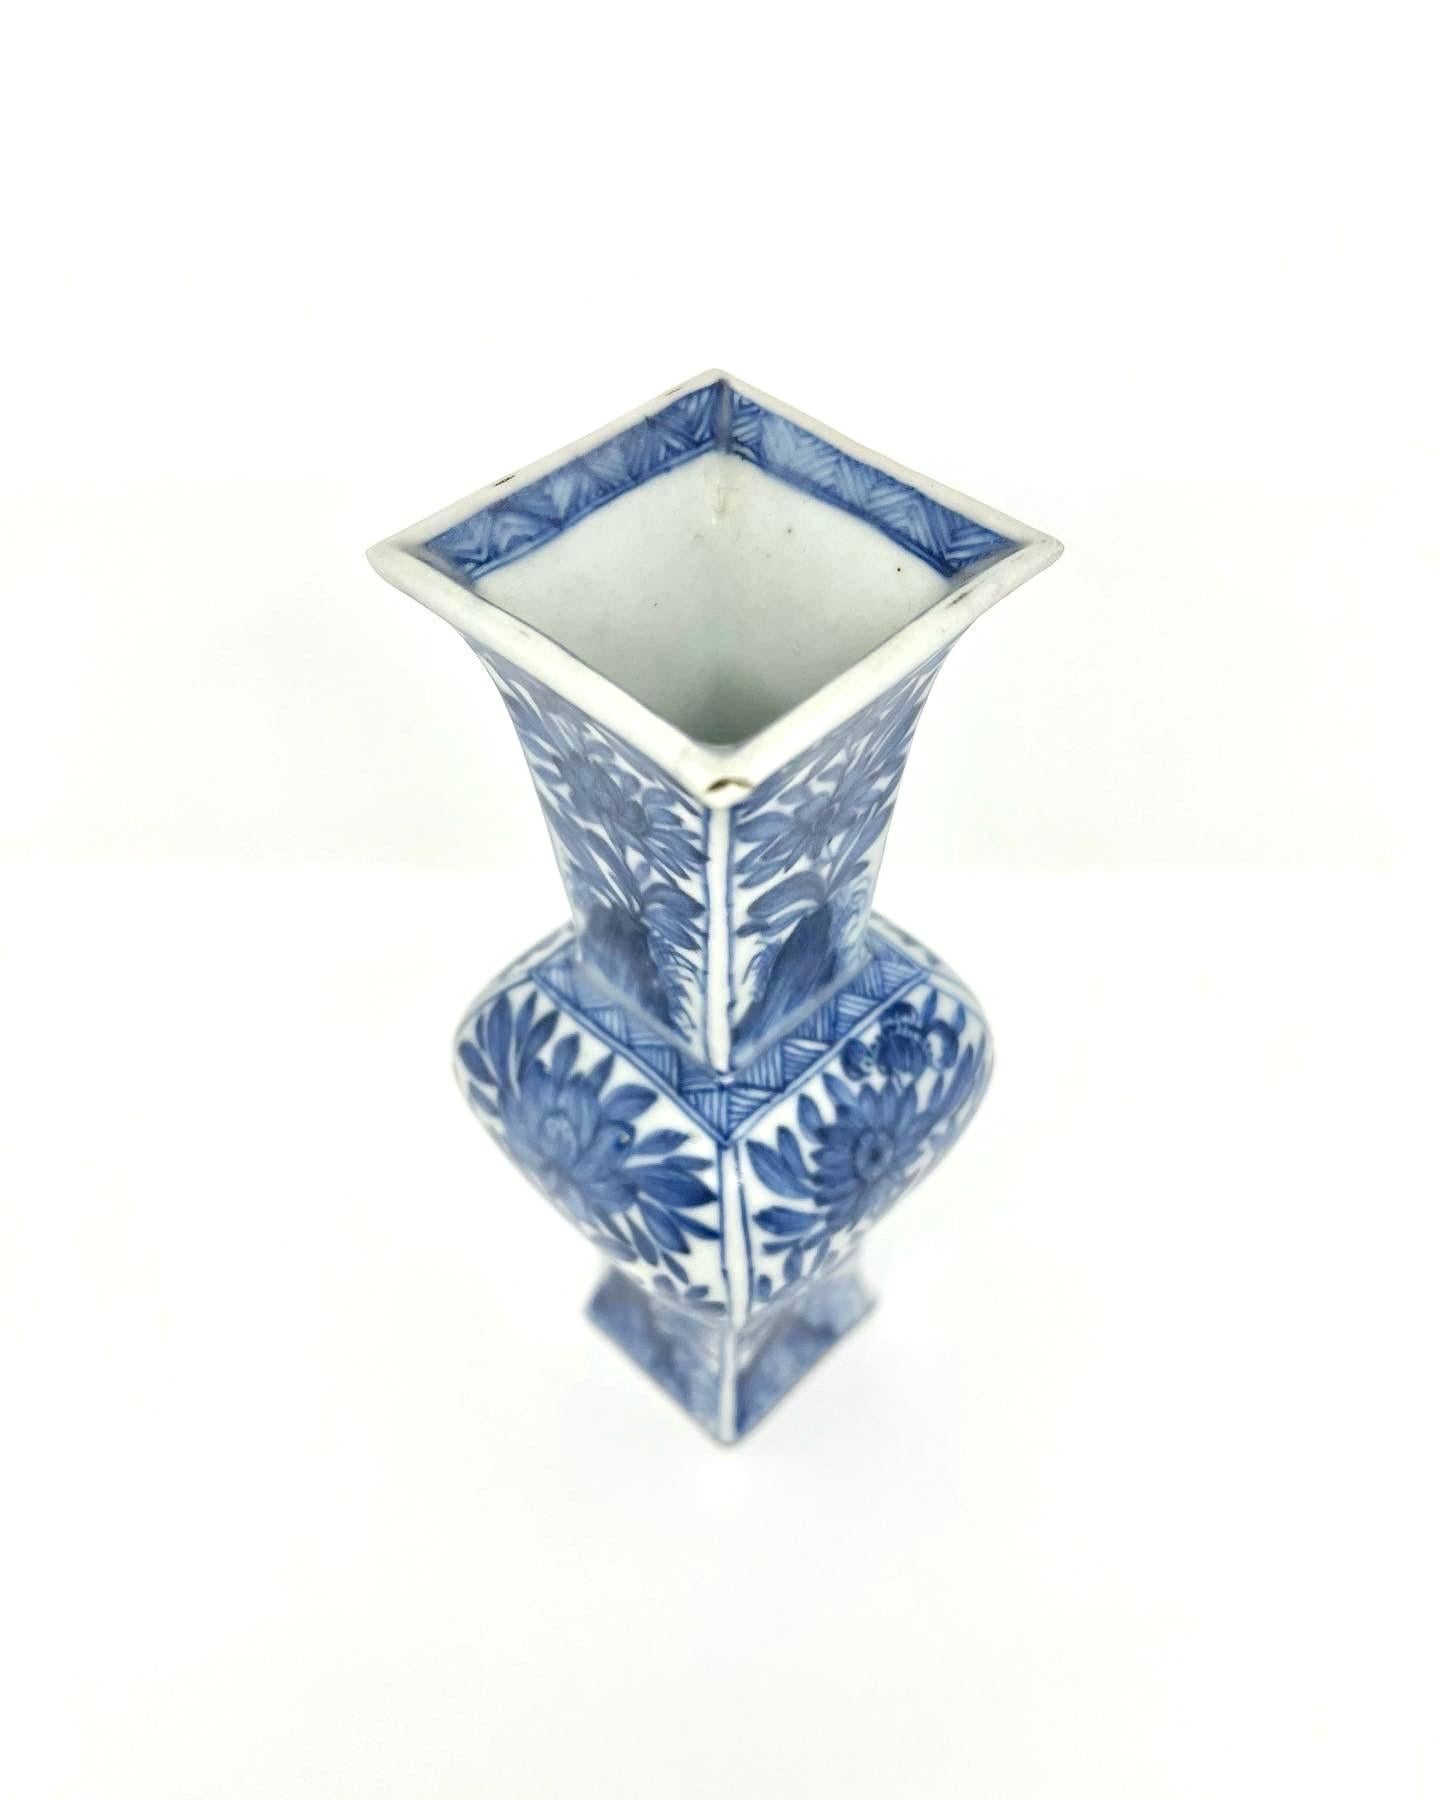 Each side pencil-painted with stylized chrysanthemum, lotus or daisy sprays issuing from rockwork. This blue and white square vase with rounded sides has a flaring mouth and a long neck. This shape can be traced back to Chinese bronzes. It is